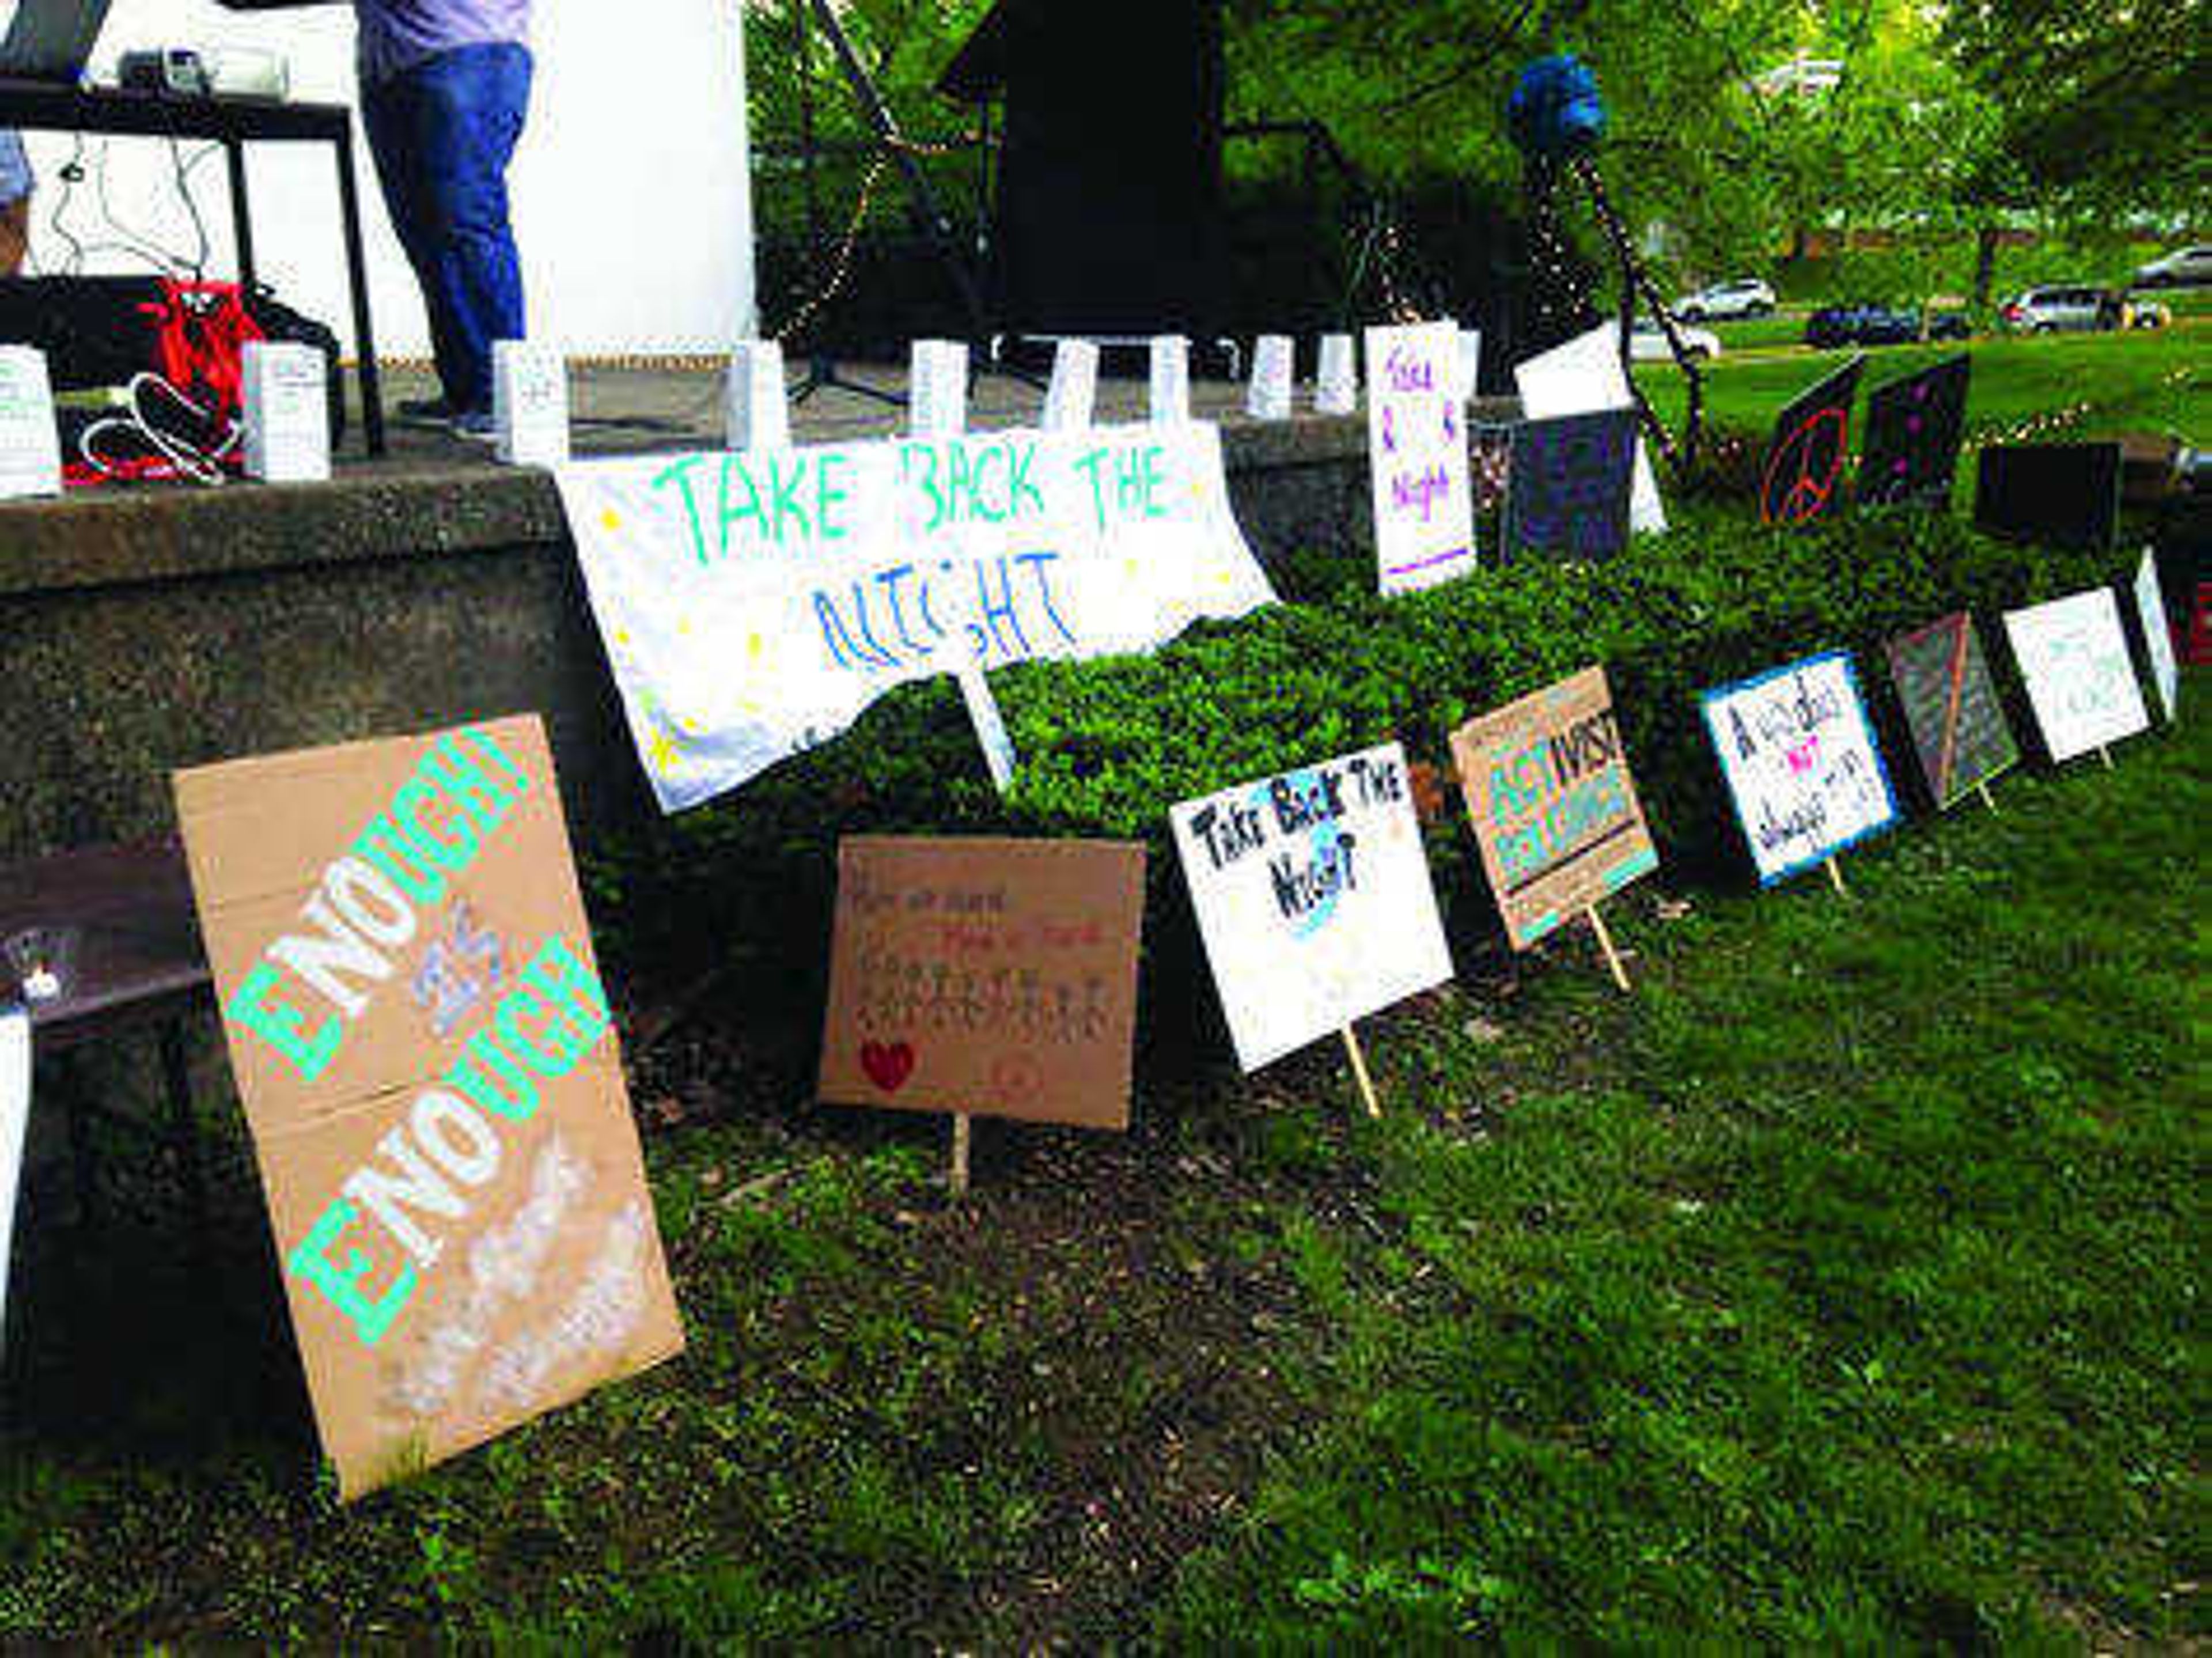 Signs were made by students the day before the "Take Back the Night" walk at an event in the University Center. Photo by Amber Cason